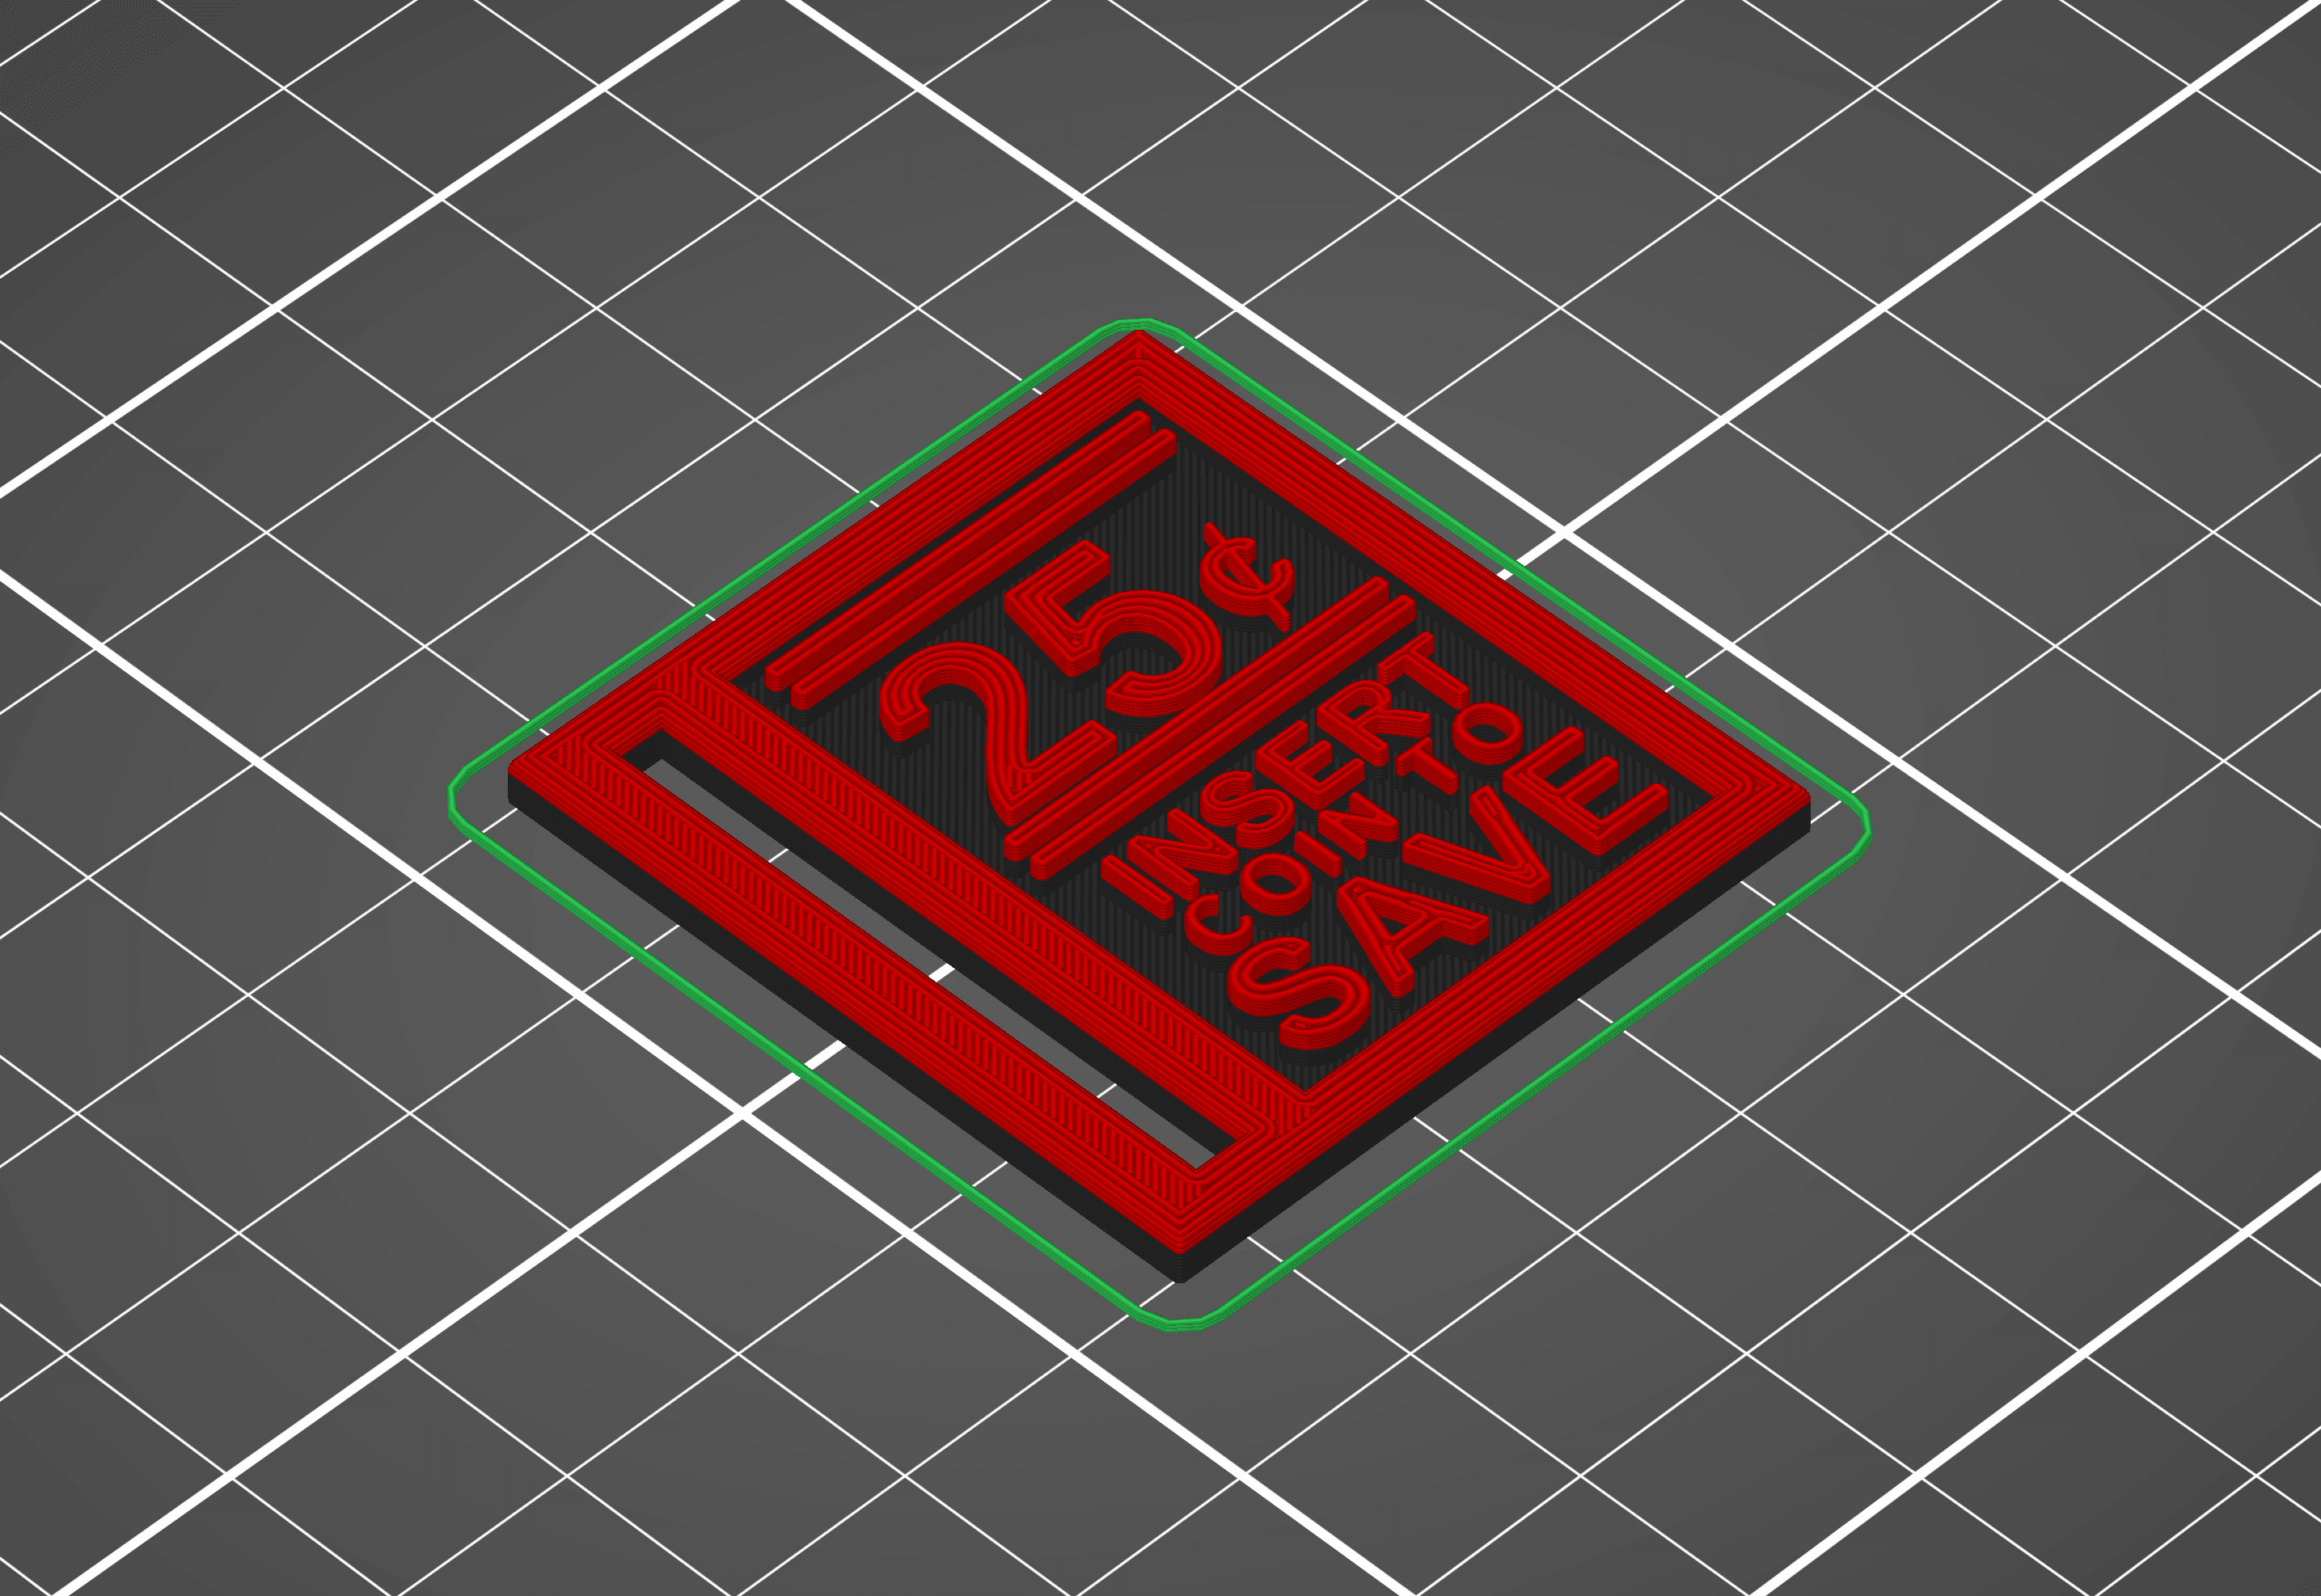 25¢ | Insert Coin To Save 3d model